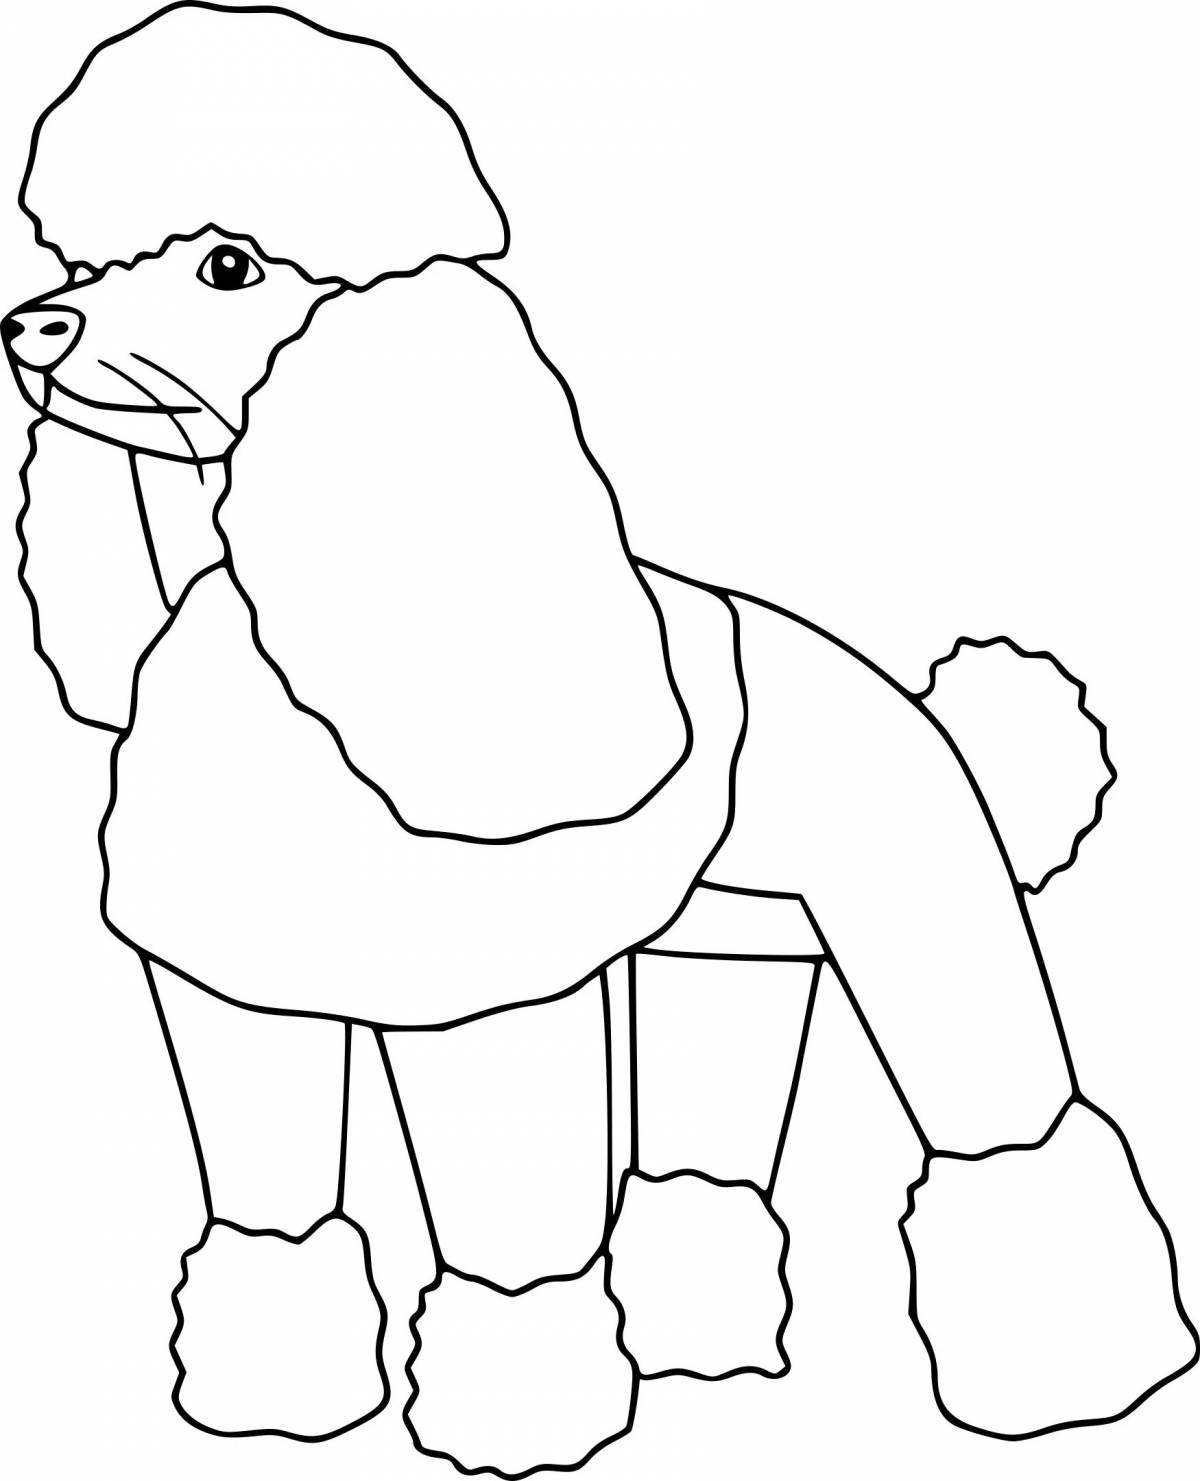 Coloring page adorable poodle for kids